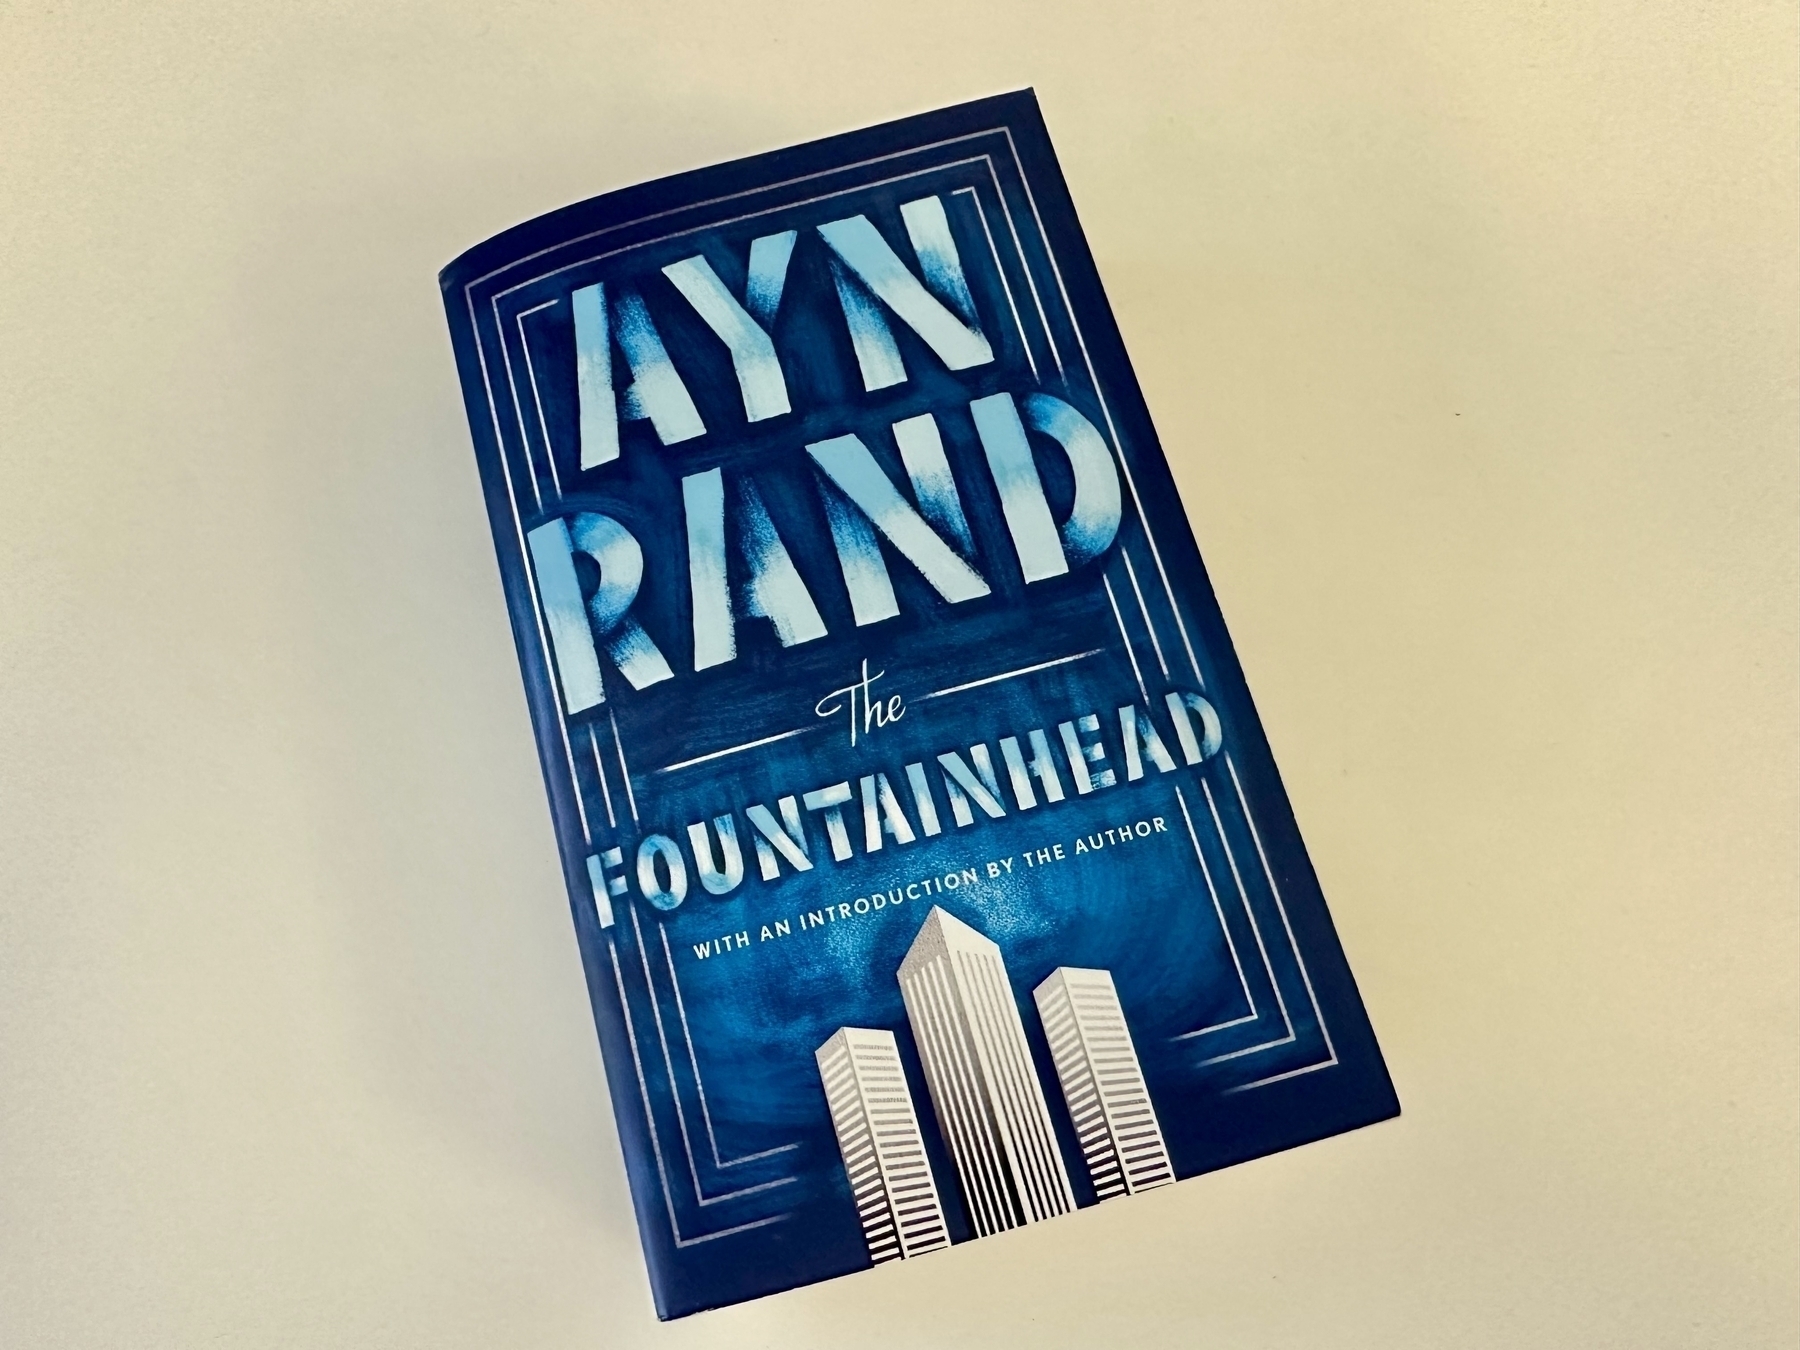 The cover illustration of Ayn Rand’s book ‘The Fountainhead’.